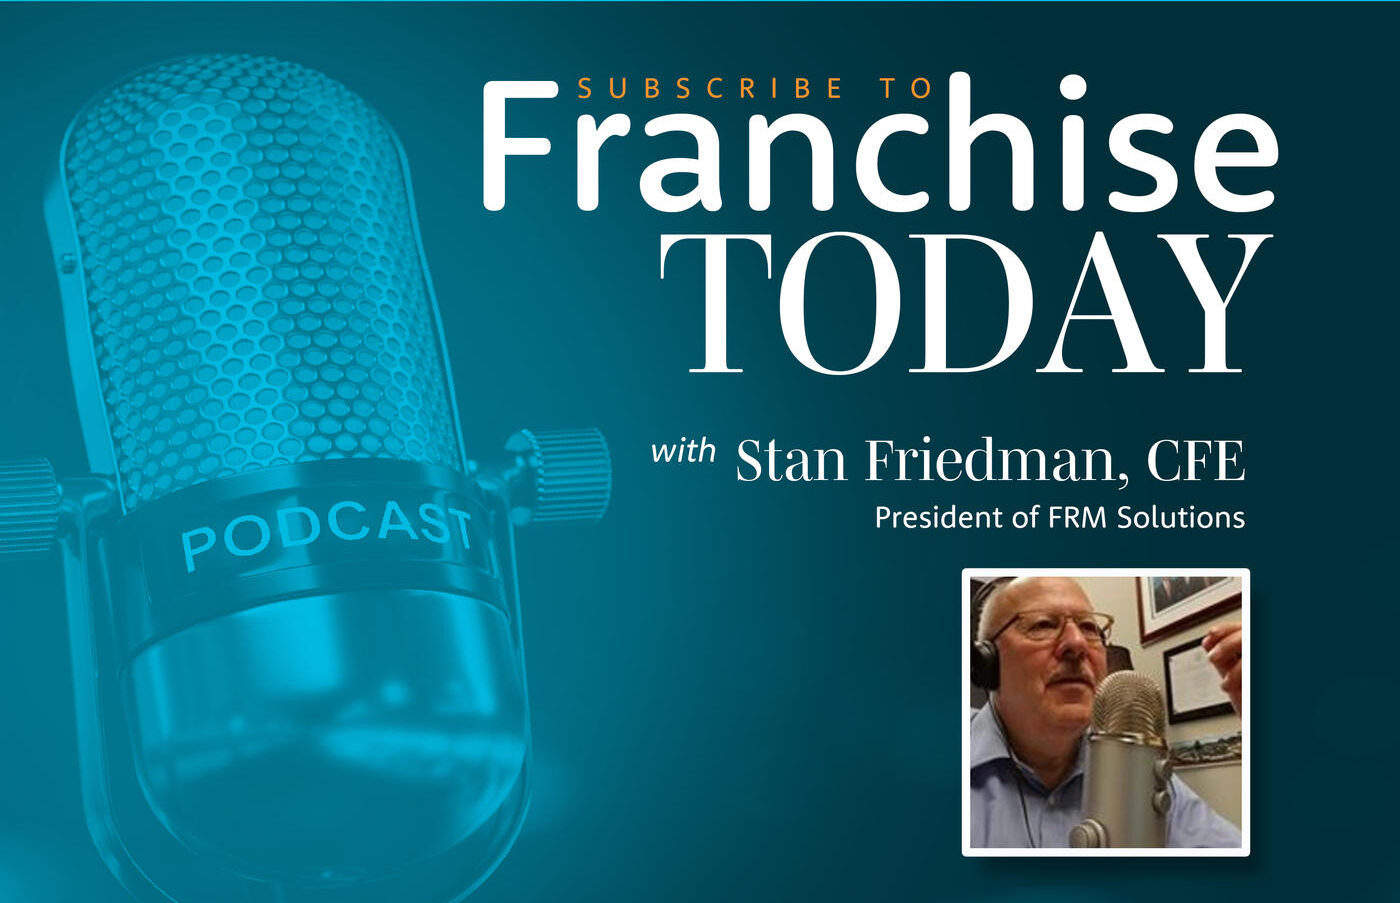 Franchise Today Podcast: Franchise Growth